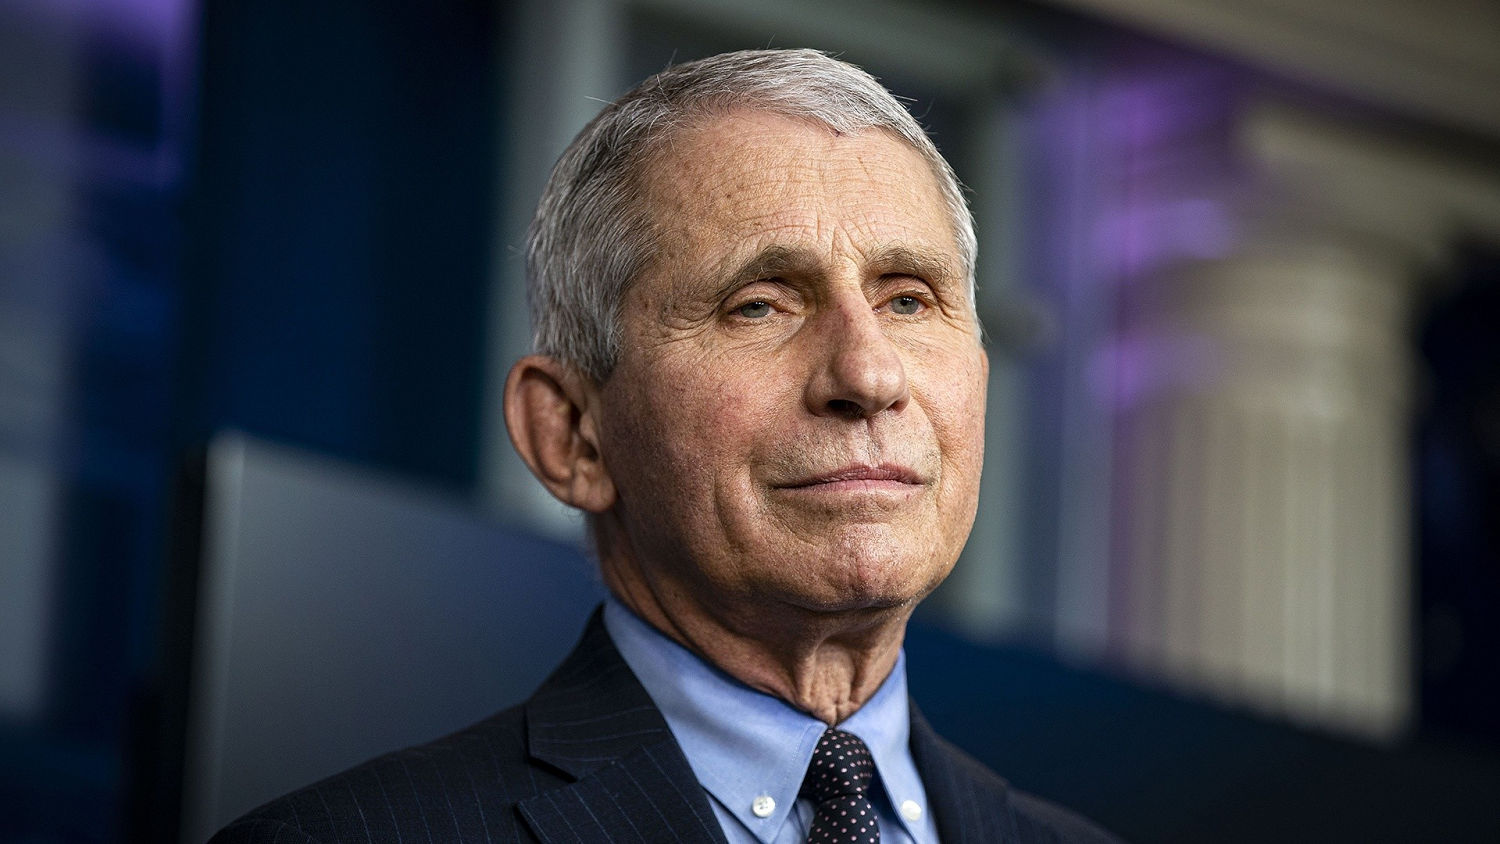 Dr. Anthony Fauci to face questions about origins of COVID-19